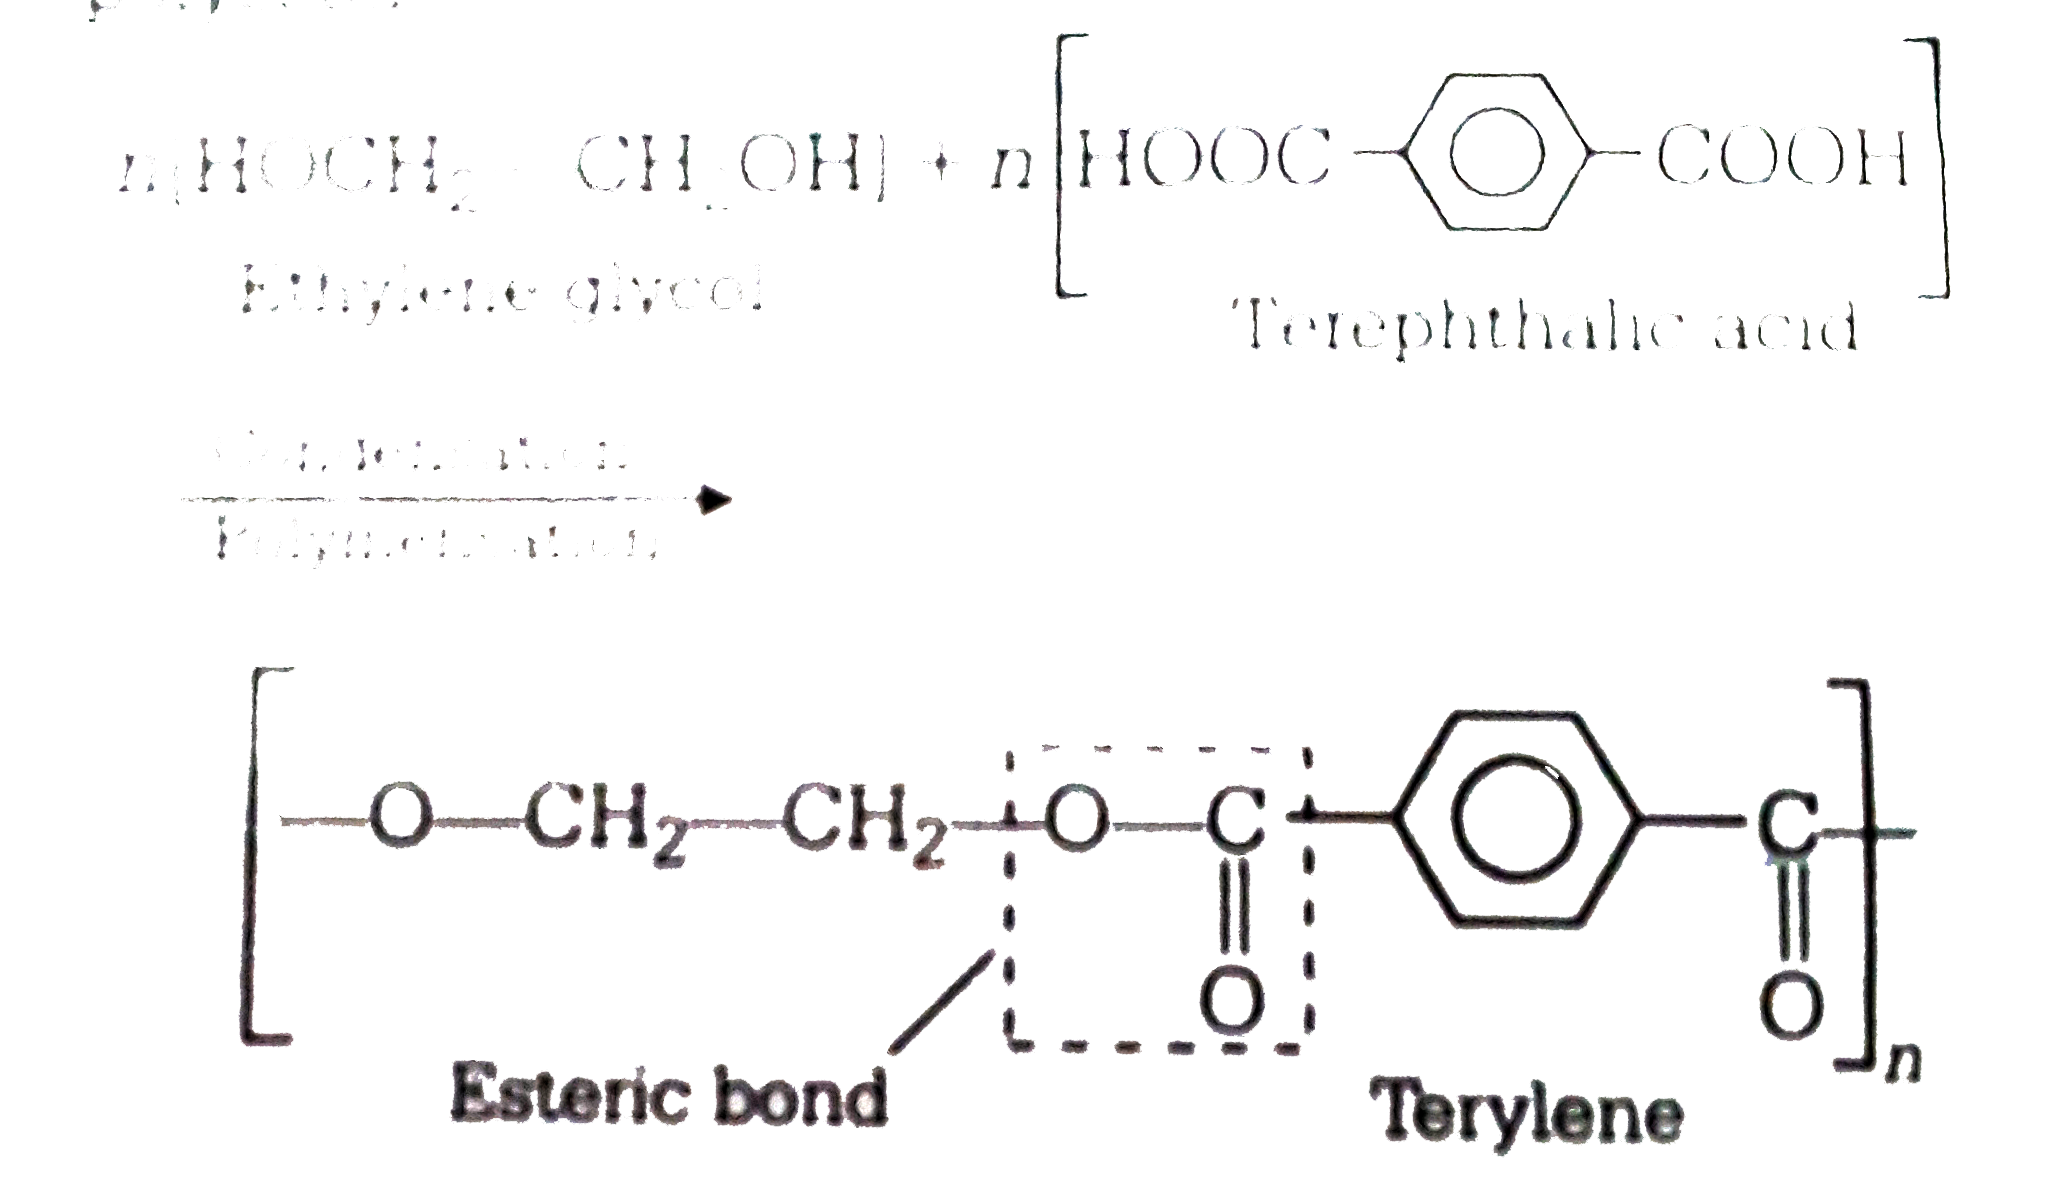 Dacron is obtained by the condensation polymerization of